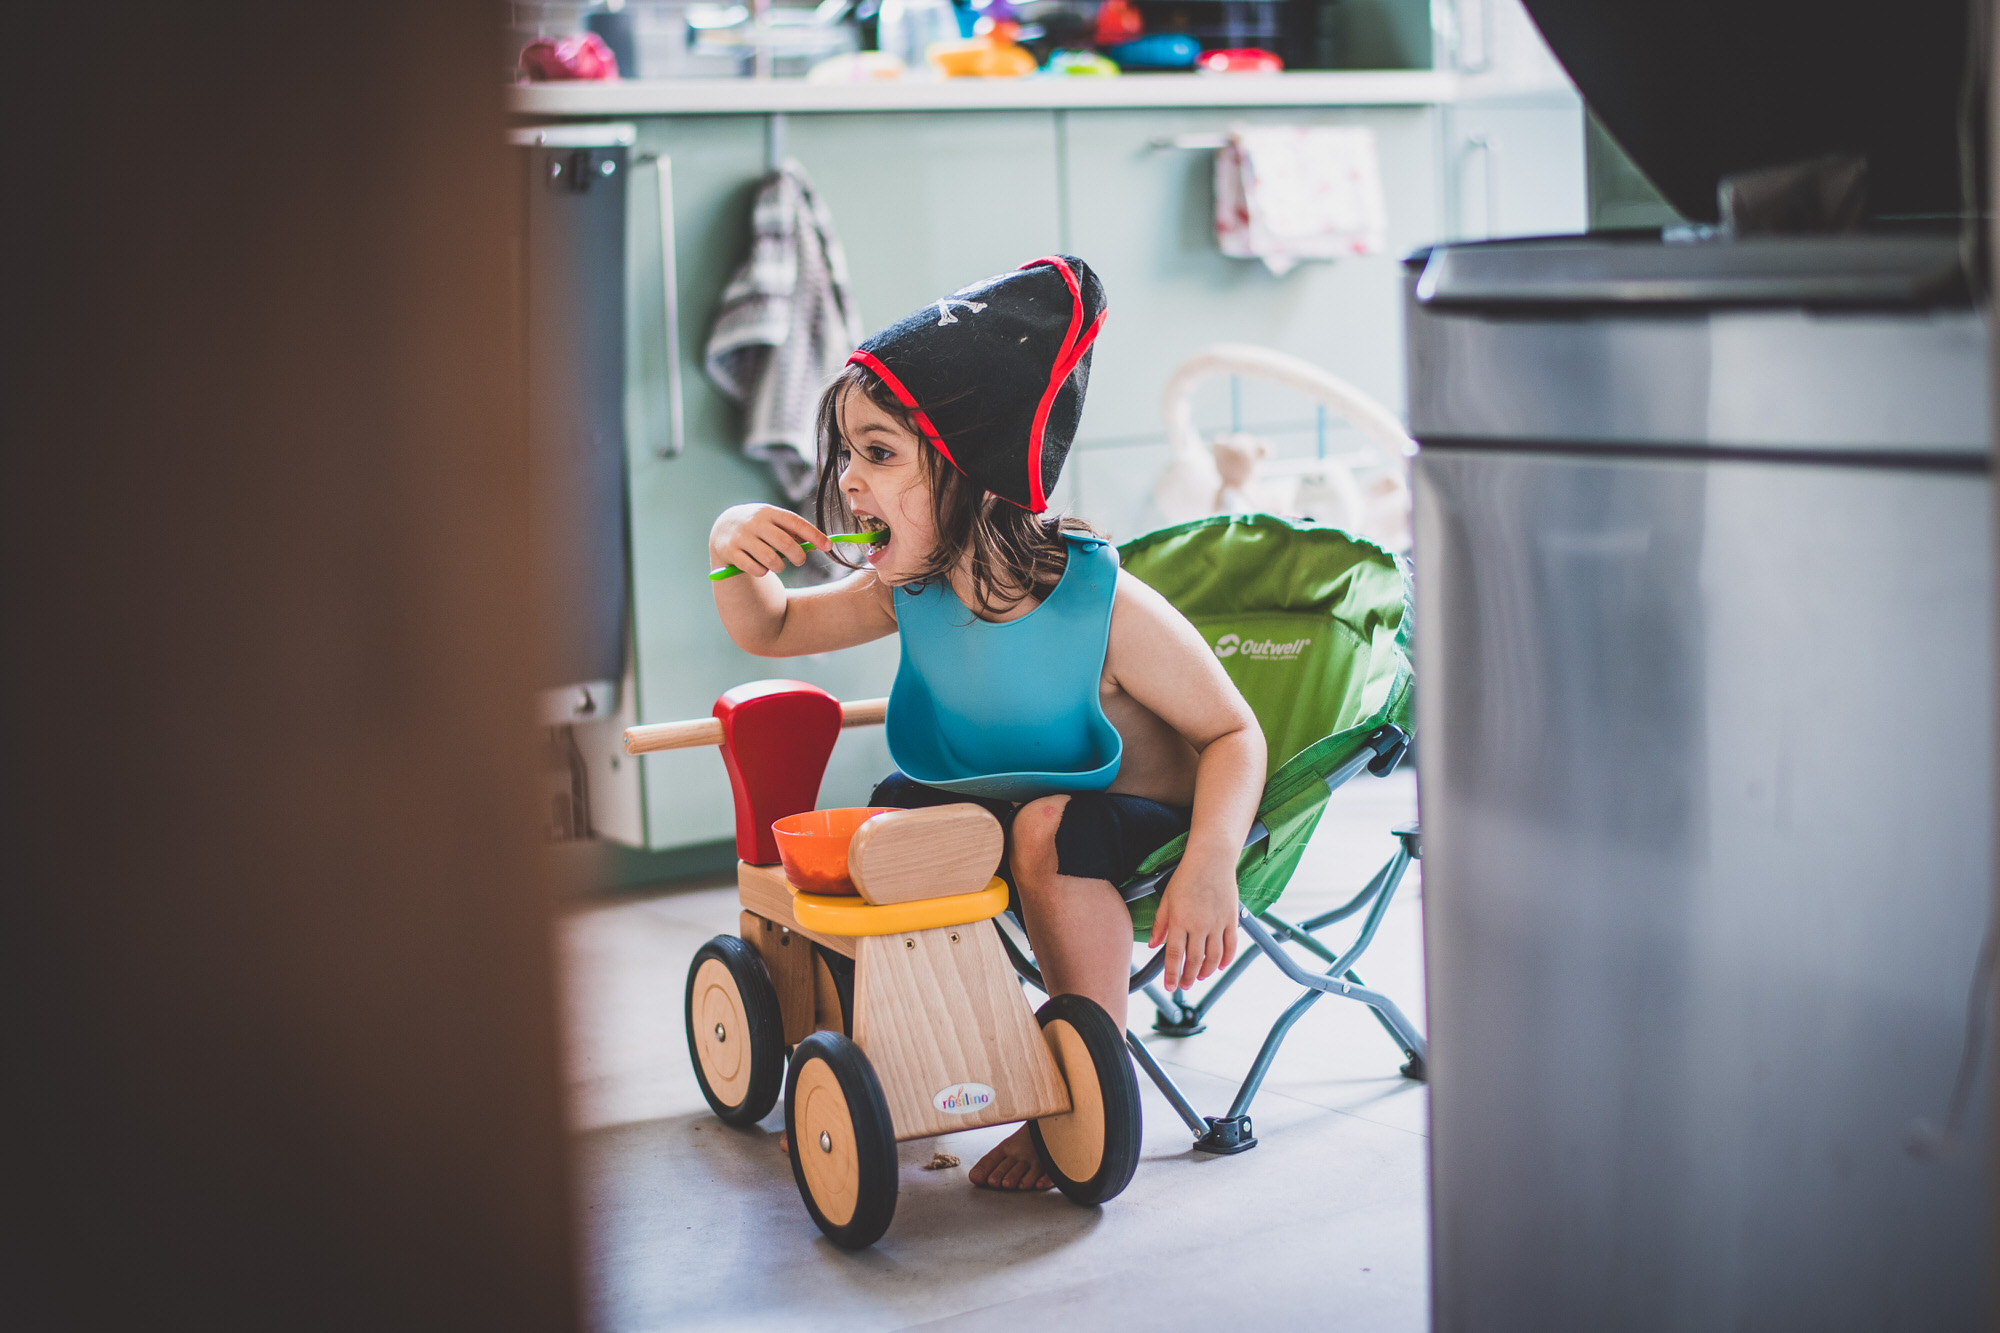 A child is sitting on a wooden toy in a kitchen, while the groom captures the moment as a wedding photographer.